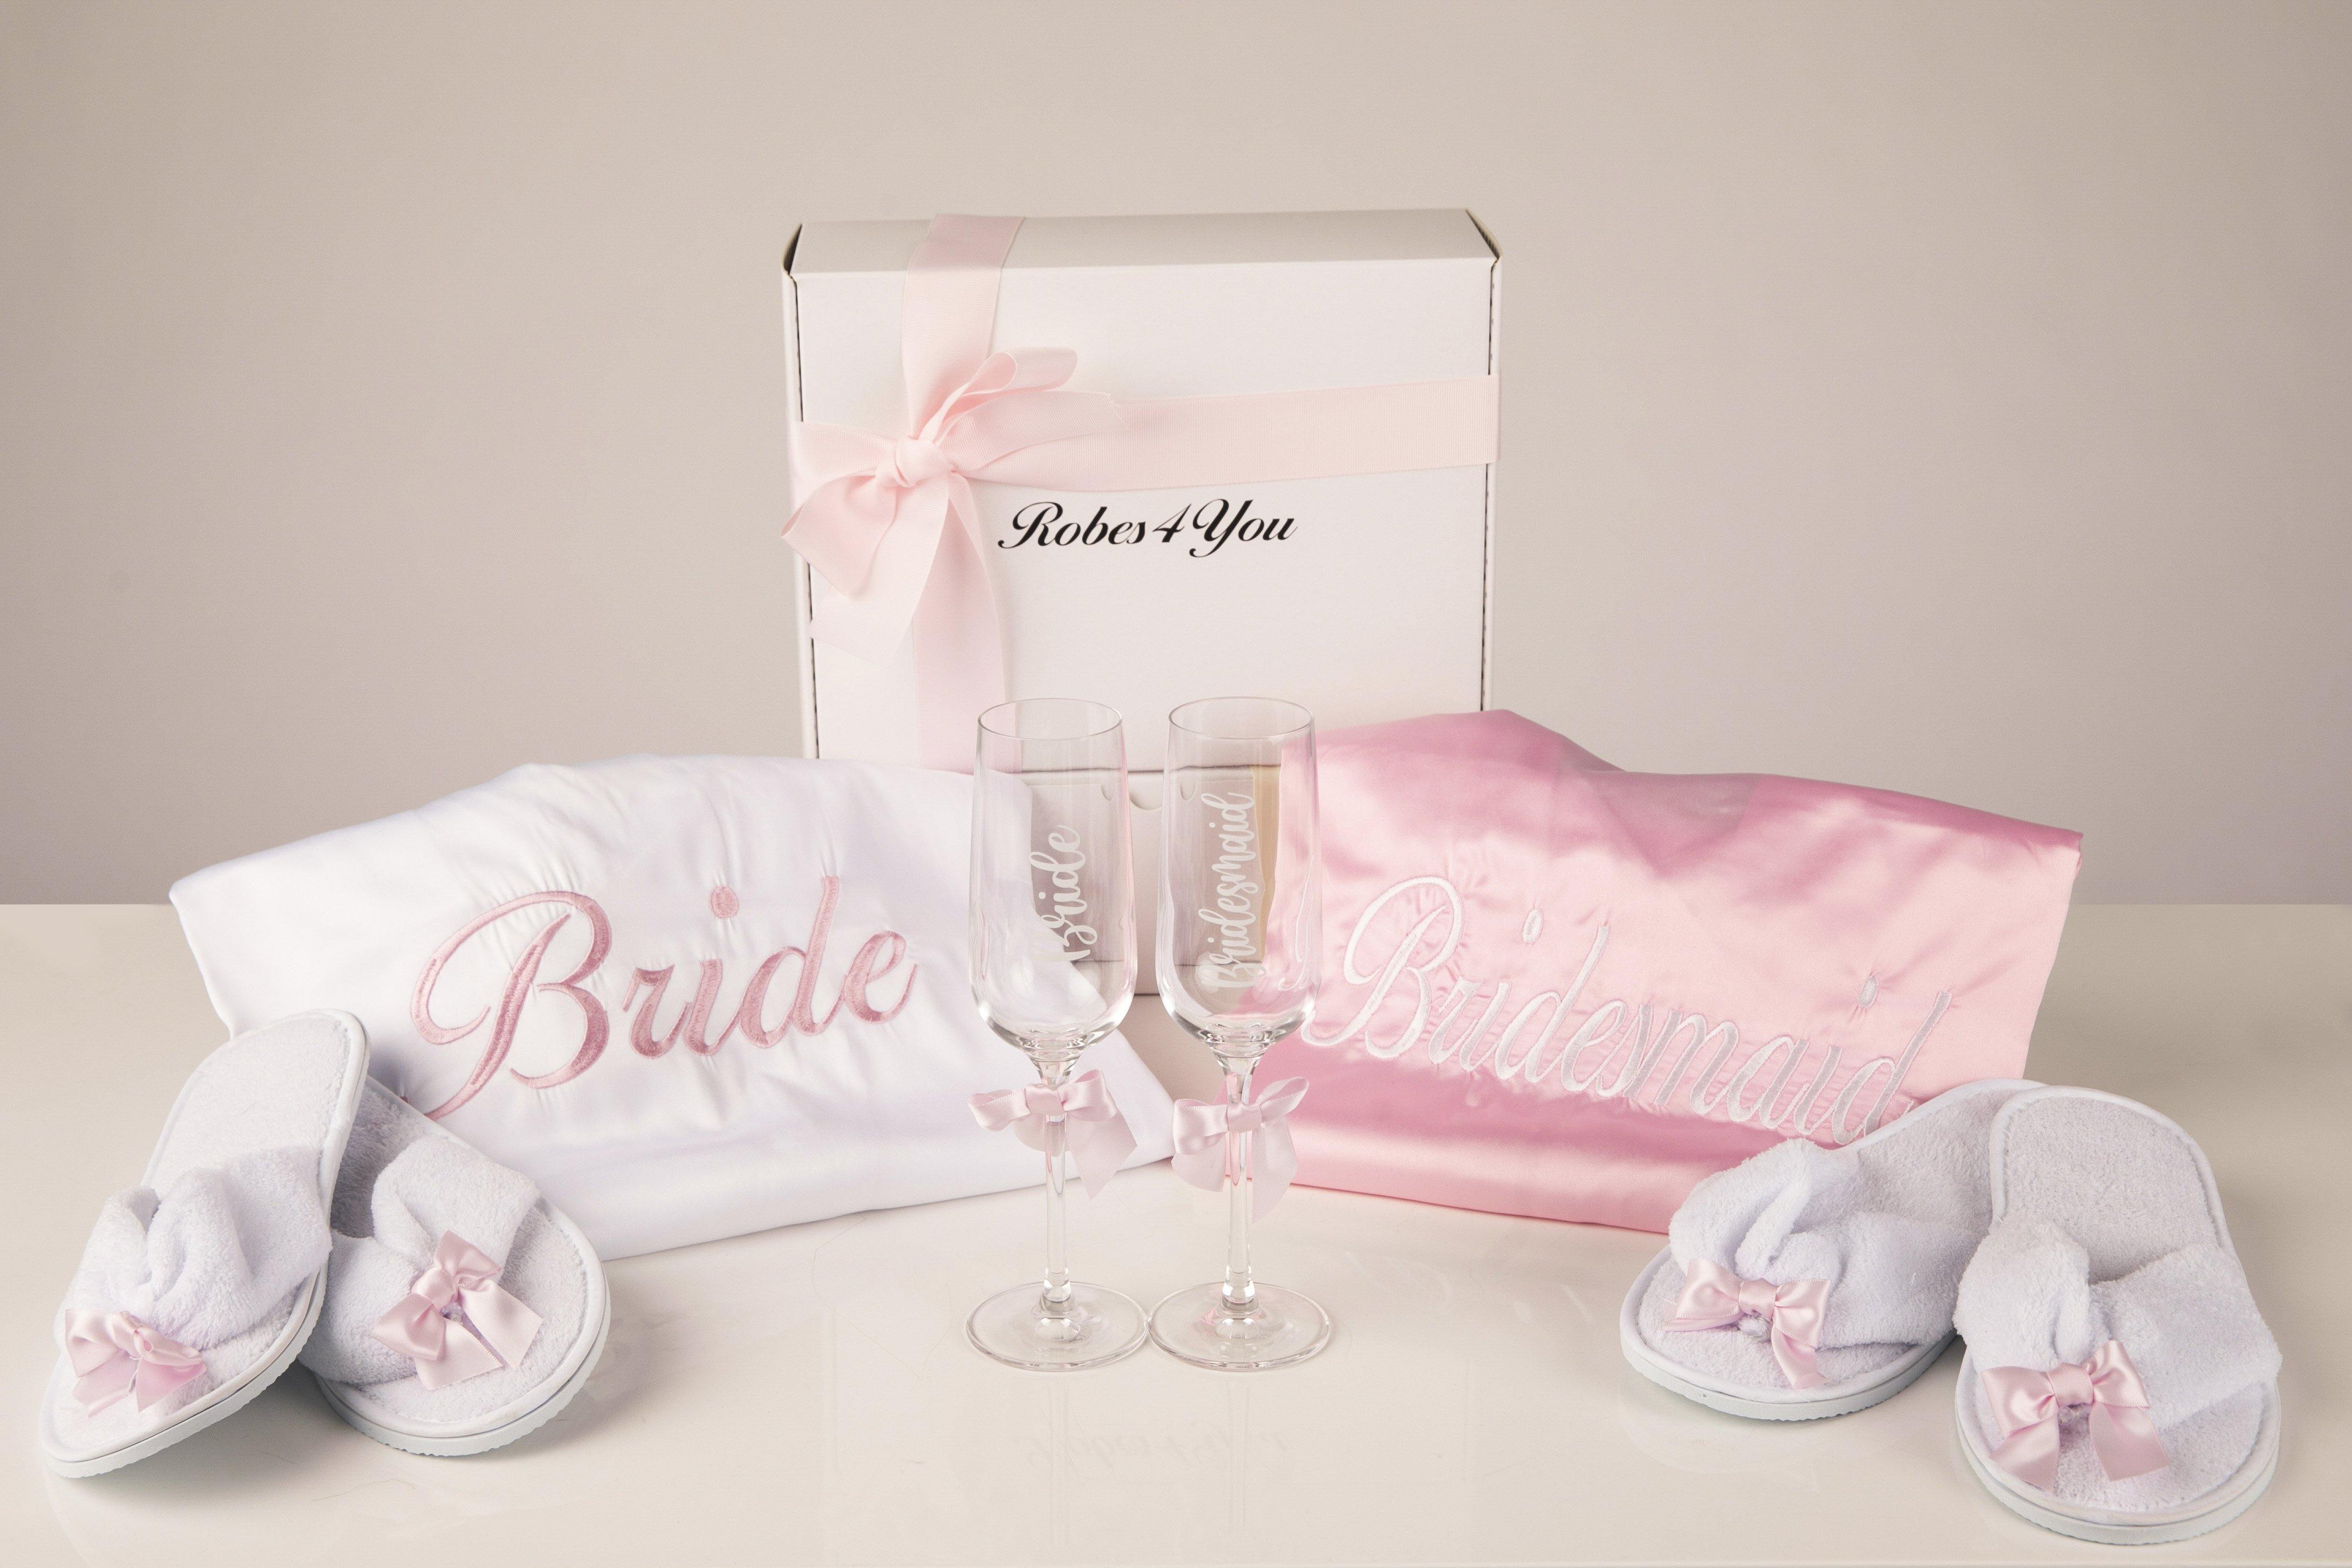 personalised white dressing gown-robes4you